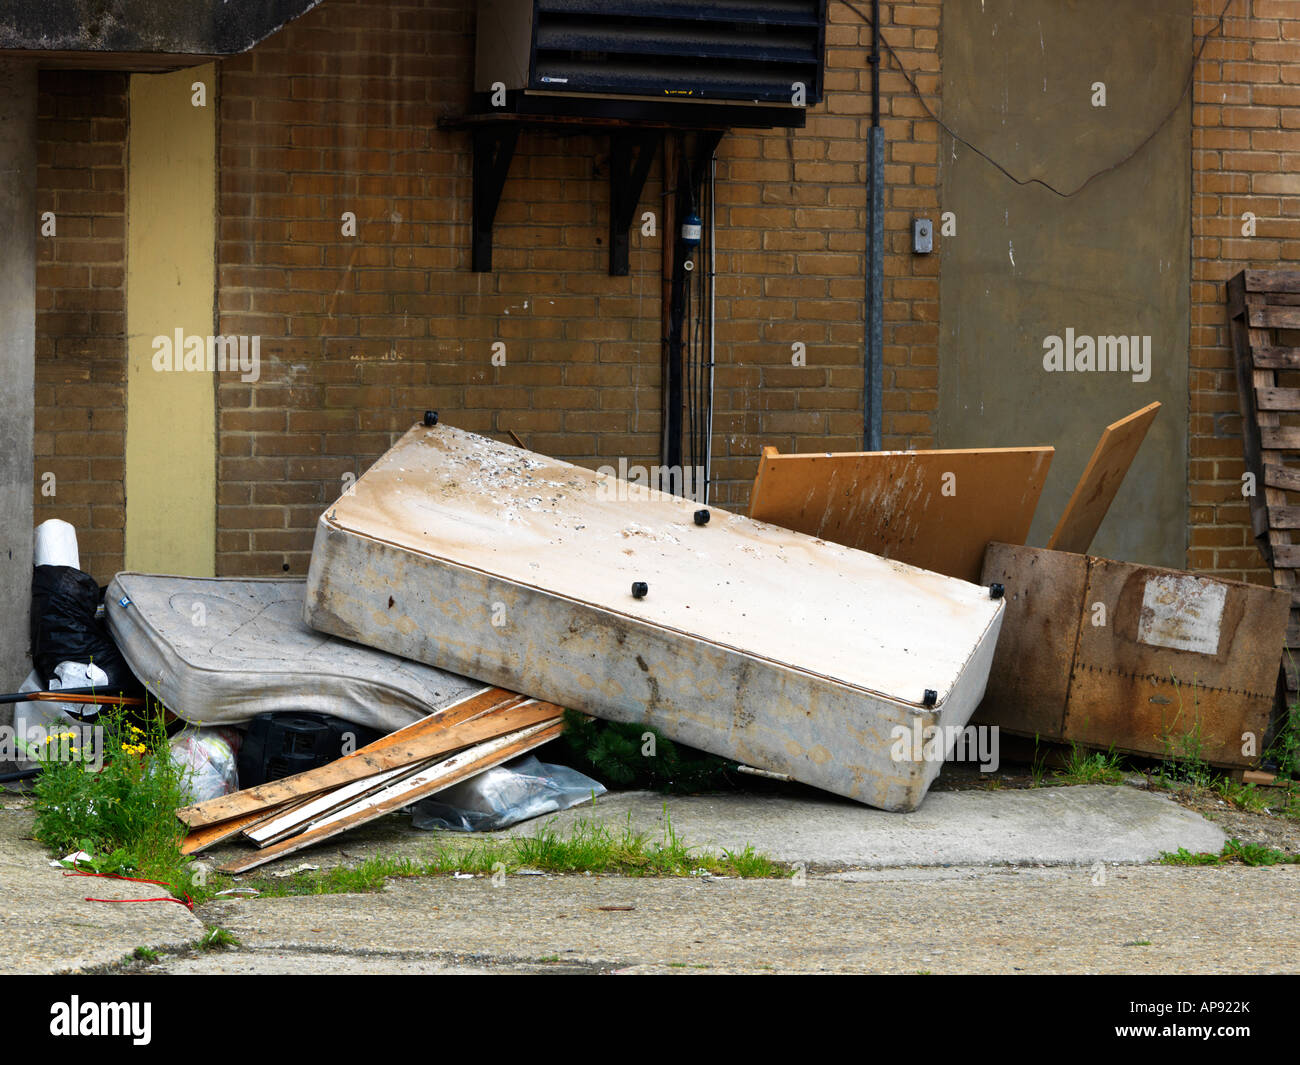 Rubbish Dumped in the Street Stock Photo